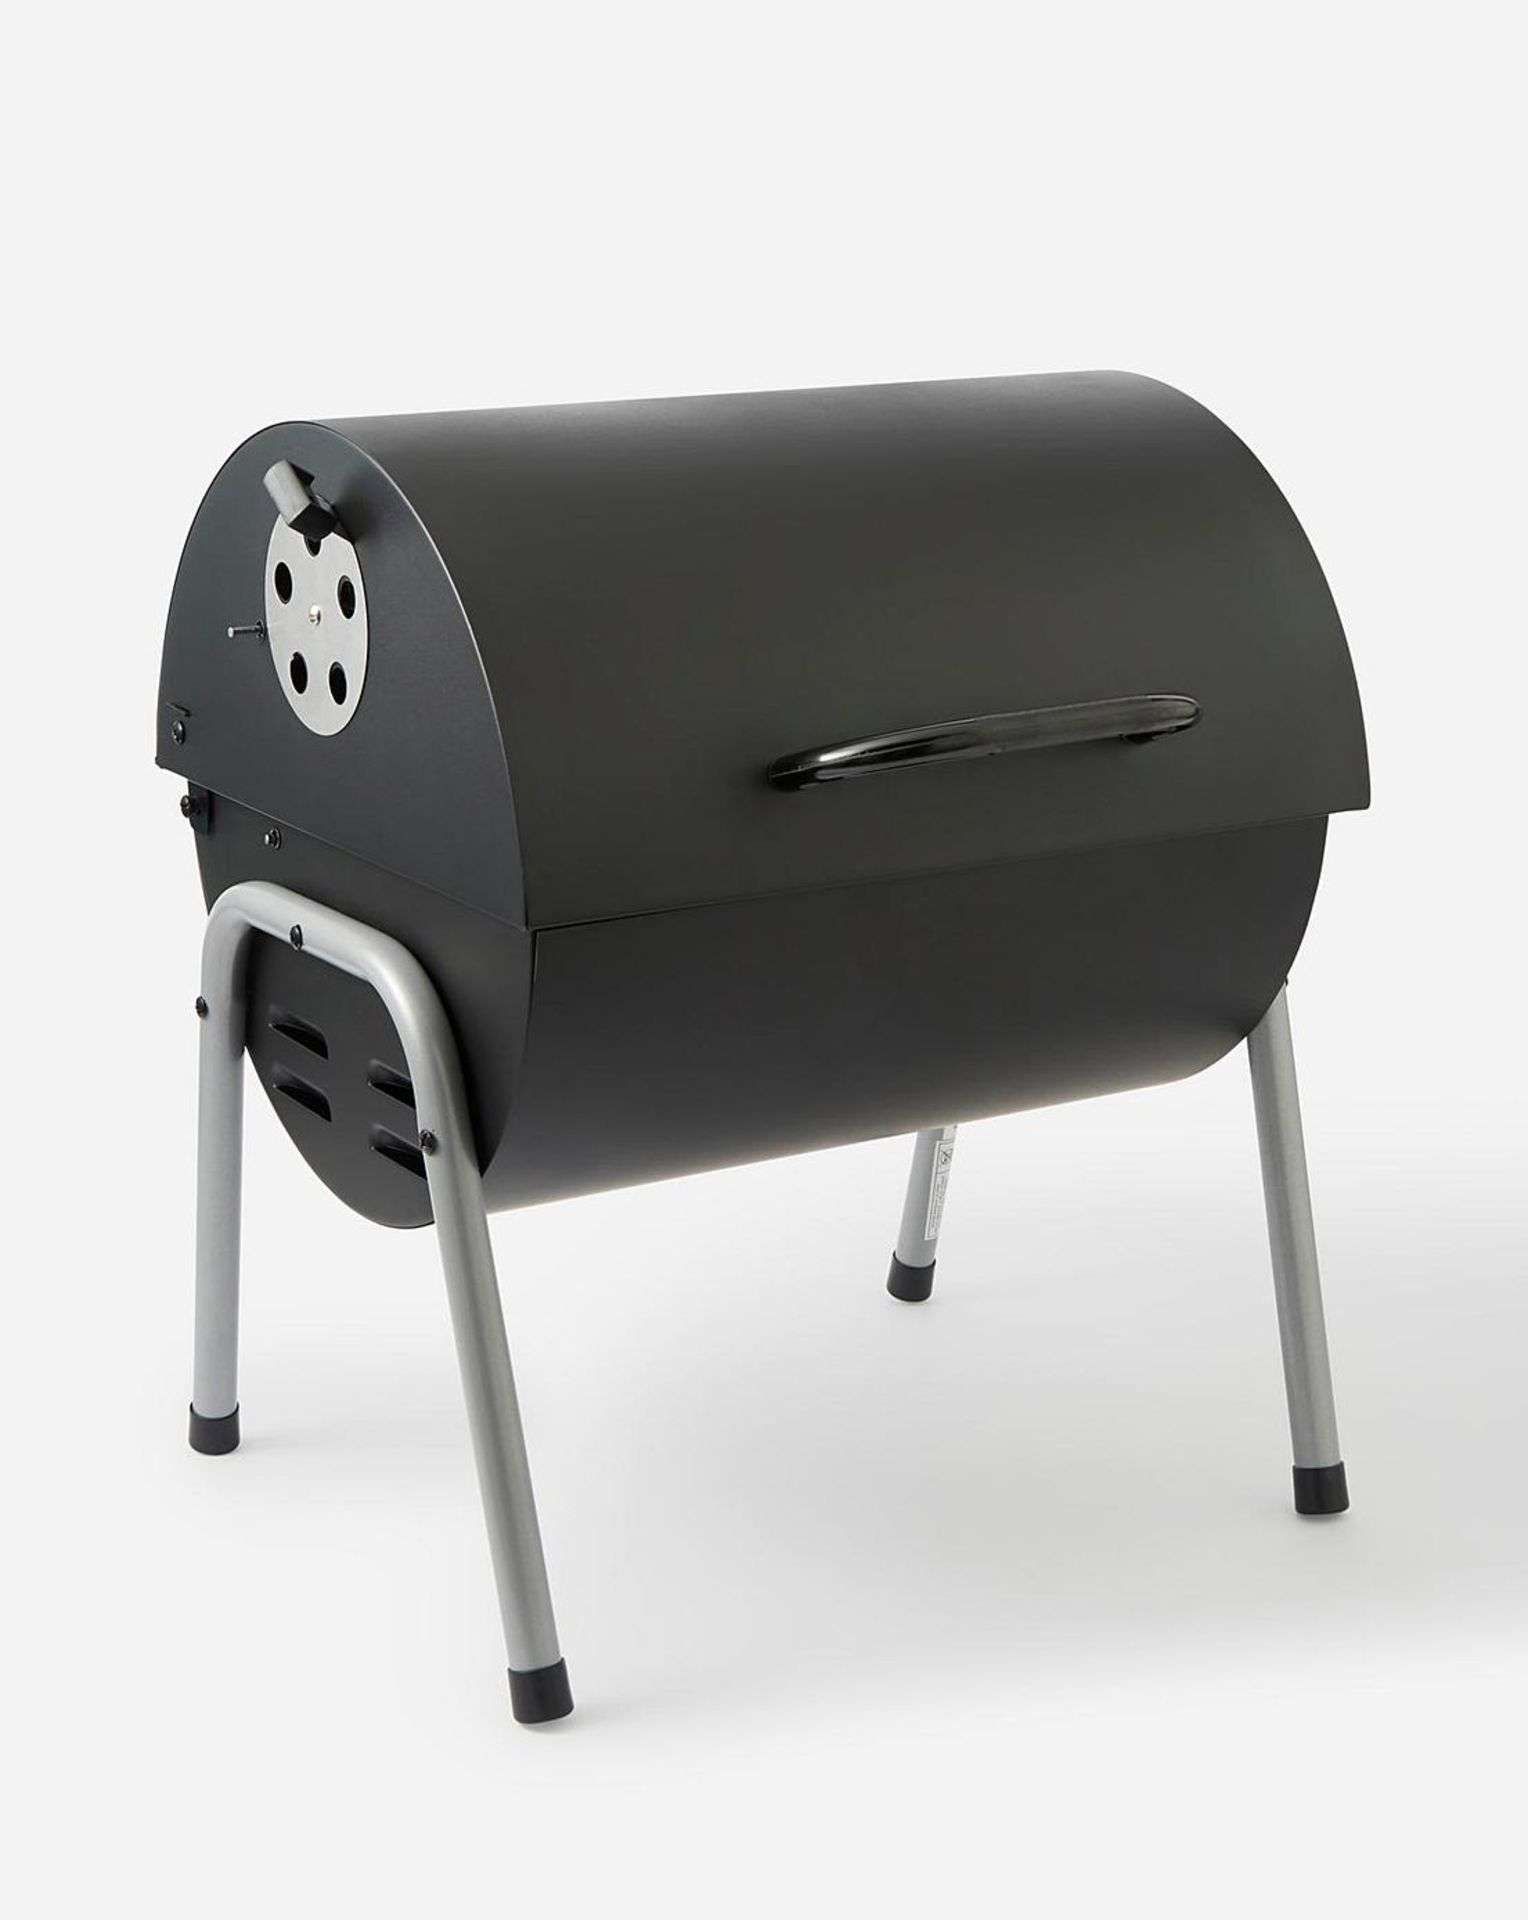 4x BRAND NEW Tabletop Oil Drum Barbeque Grill. RRP £59.99 EACH. Black steel firebowl with enamel - Image 3 of 4